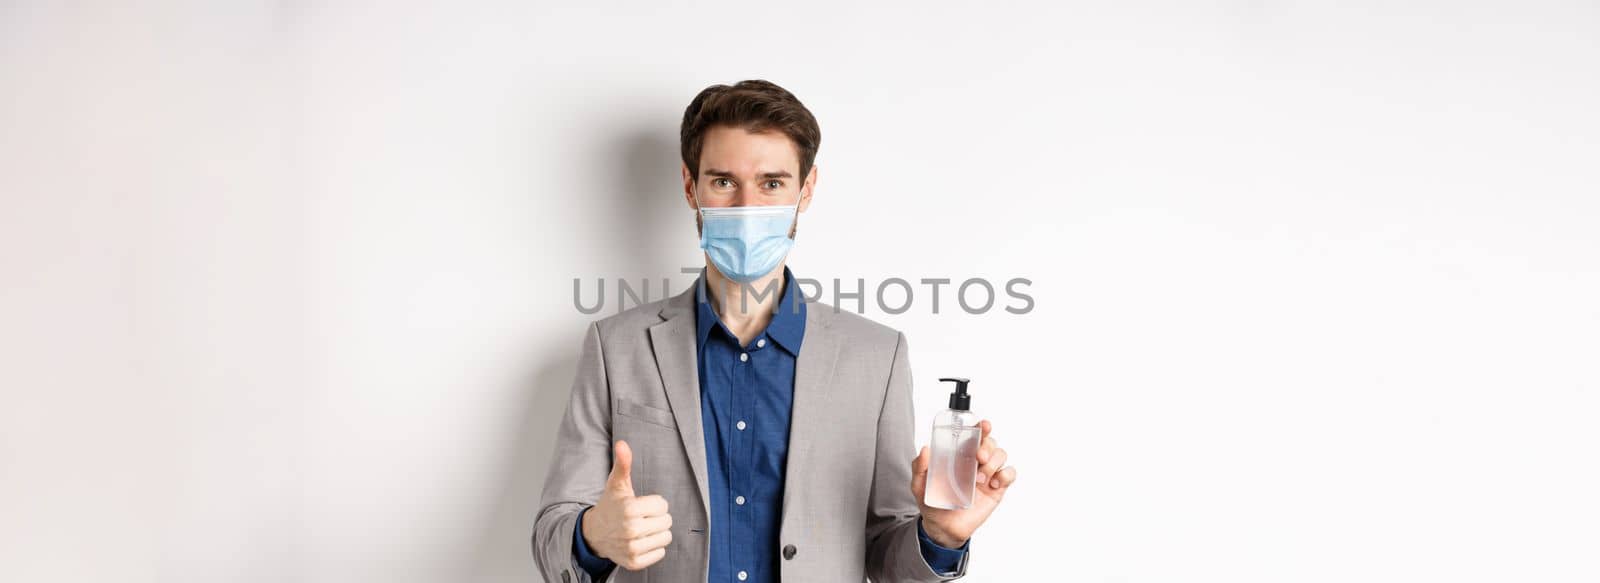 Covid-19, pandemic and business concept. Businessman in office suit and medical mask showing bottle of hand sanitizer and thumb up, recommend use antiseptic at work.